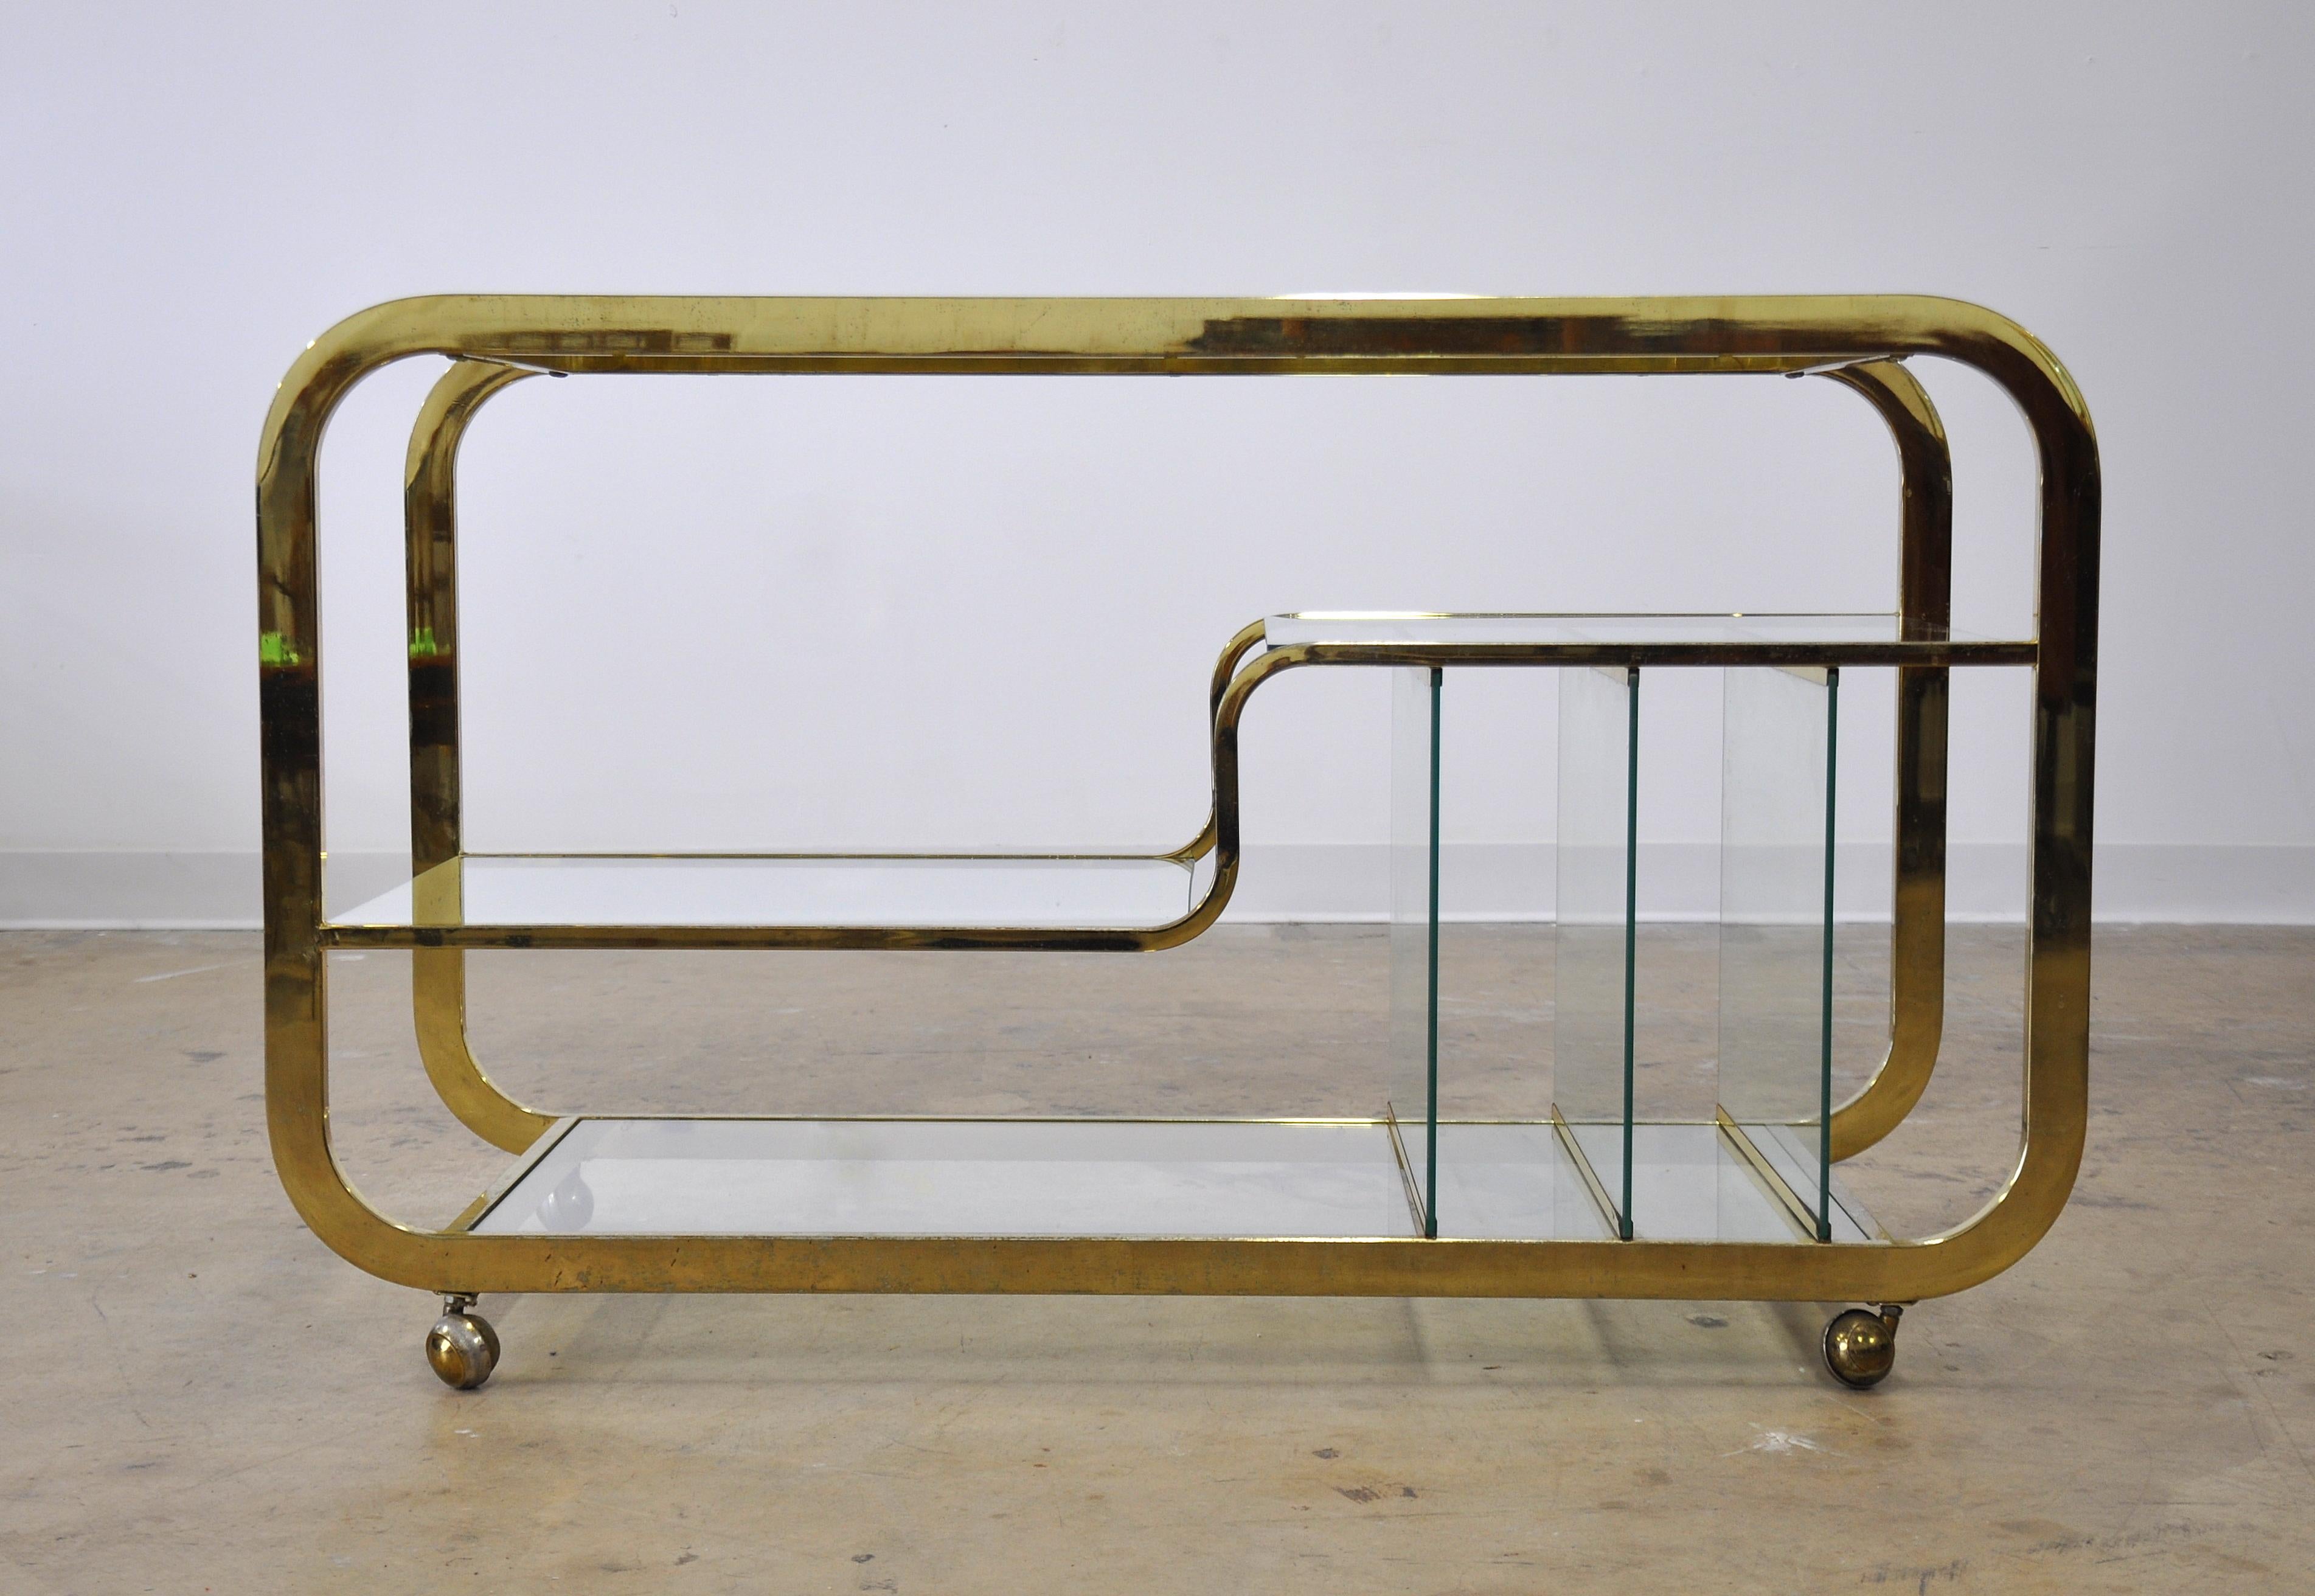 A fabulous vintage three-tier rolling bar cart, serving trolley and/or media console. The table features a brass frame and three tiers with inset clear glass and dividers that can accommodate a turntable, records and books, as well as bottles, bar